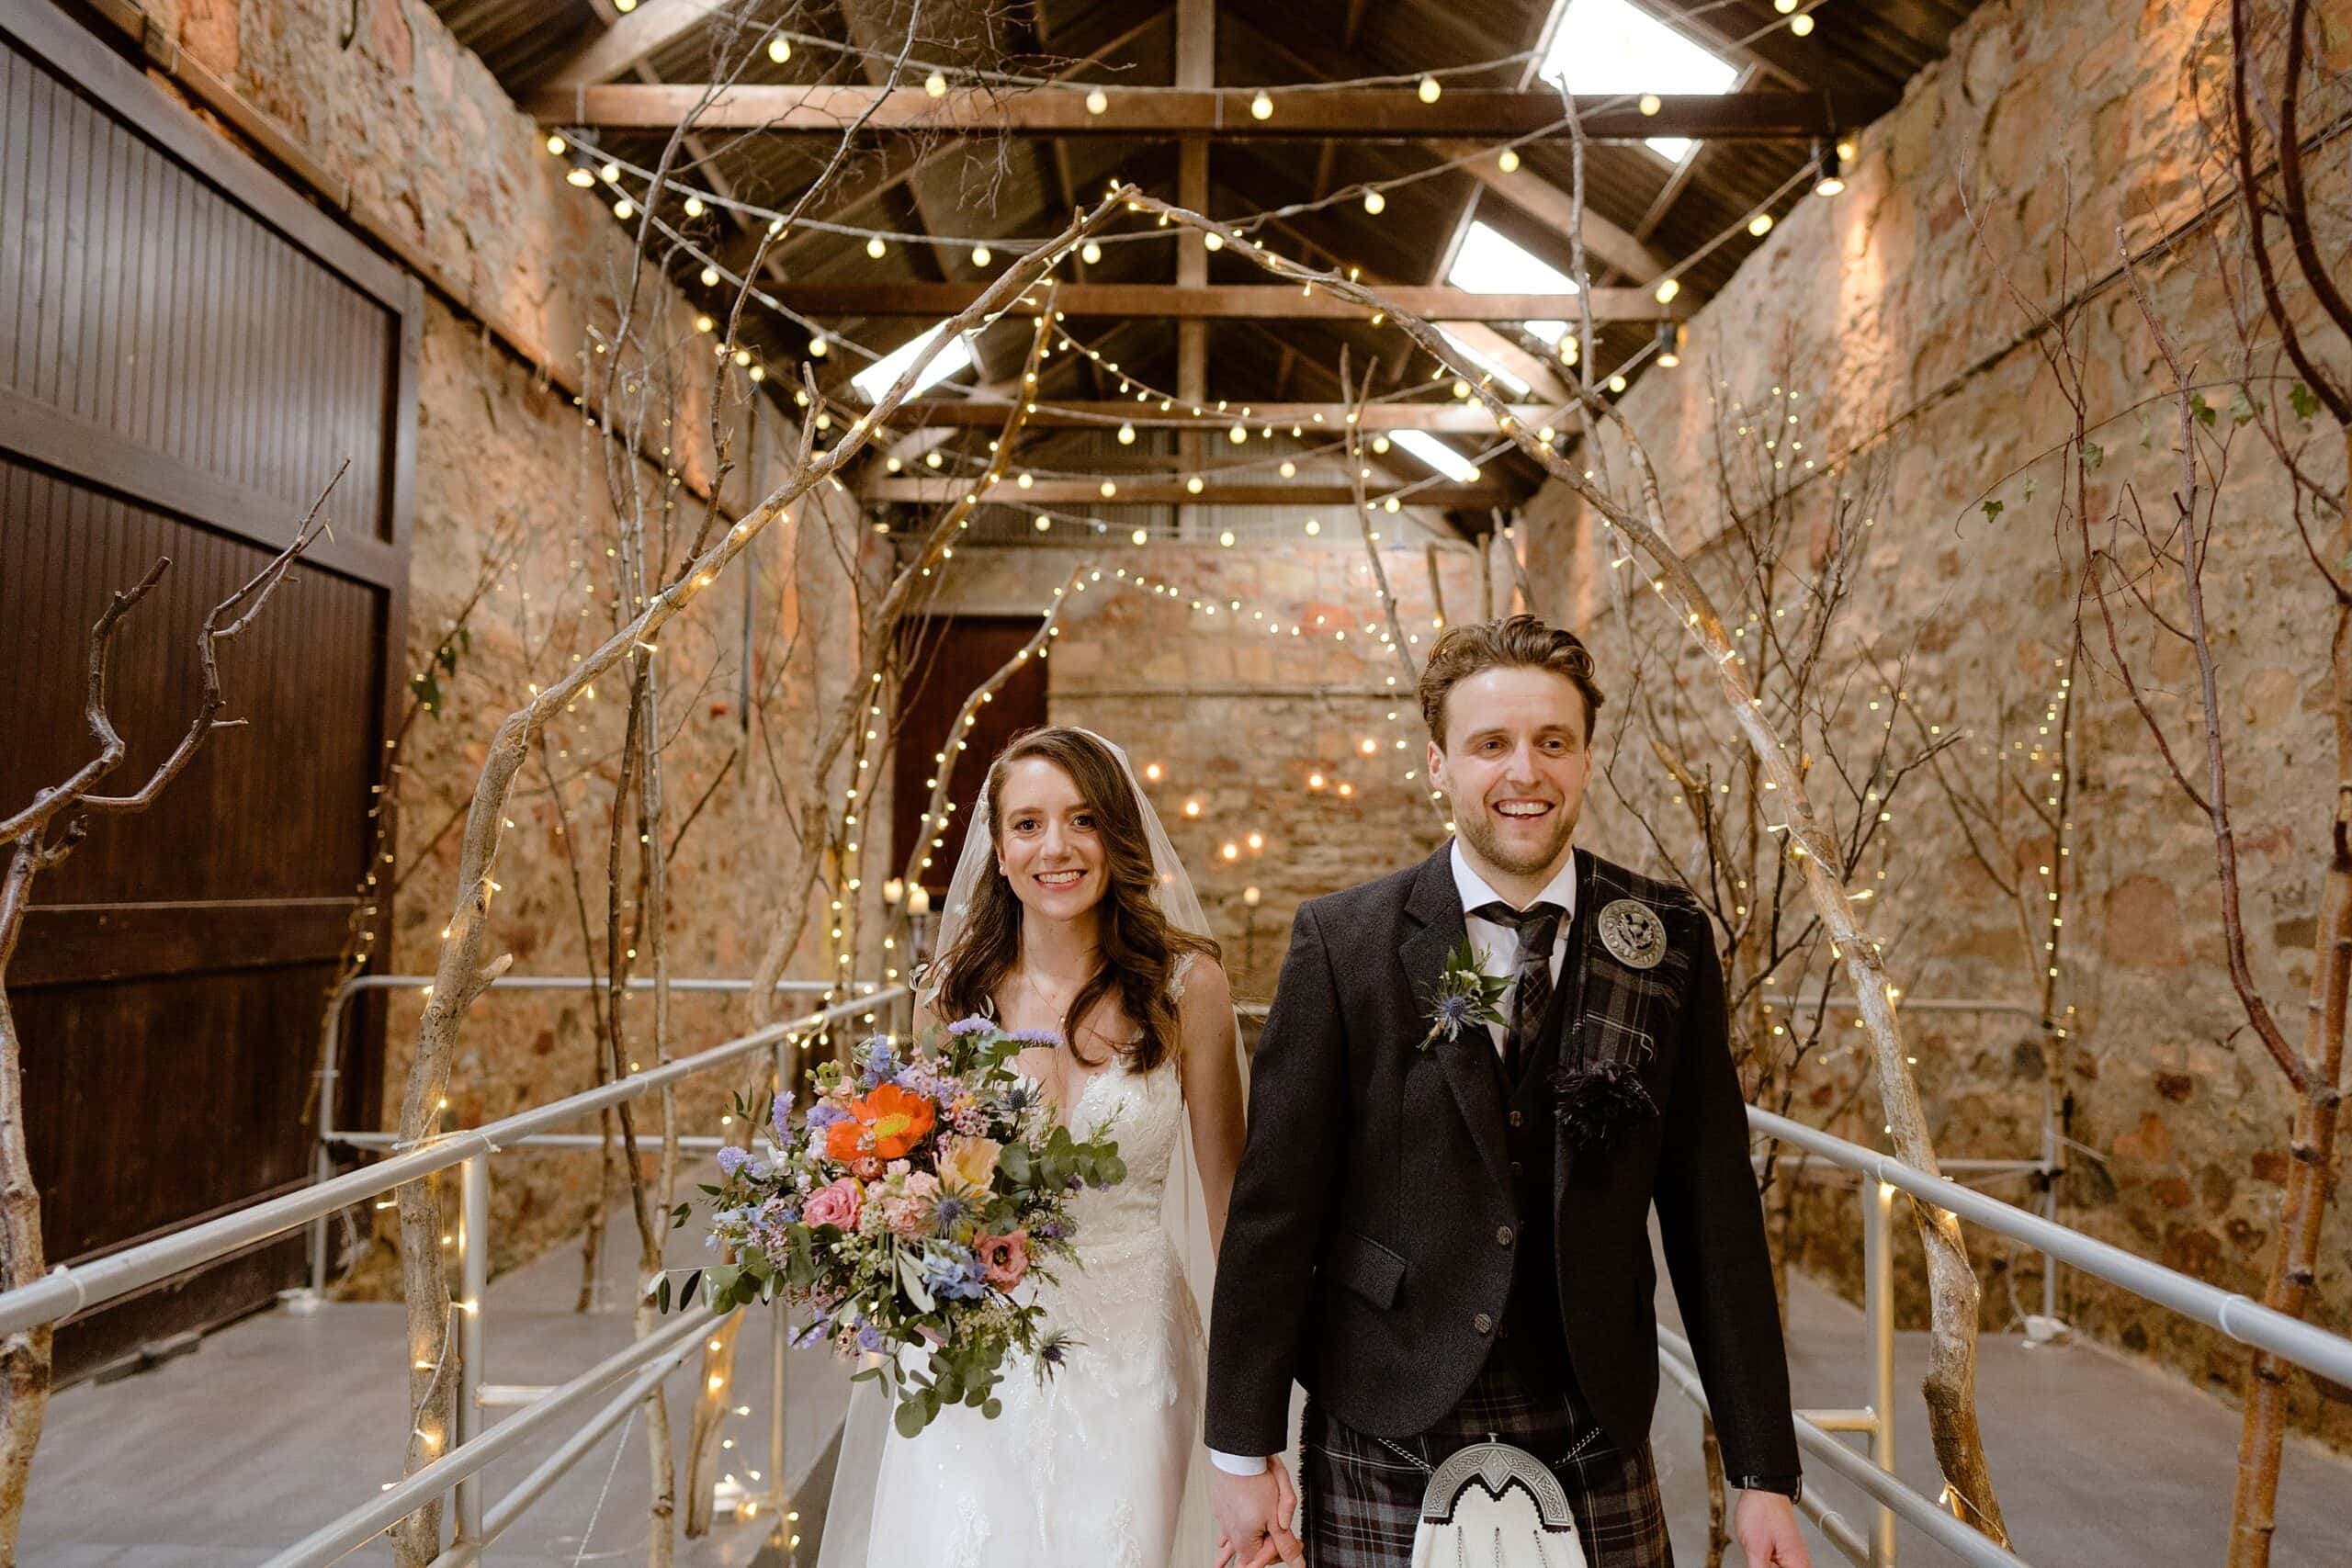 the bride and groom hold hands and smile as they walk through an archway of branches and fairy lights at a scottish barn wedding venue photographed by st andrews wedding photographer